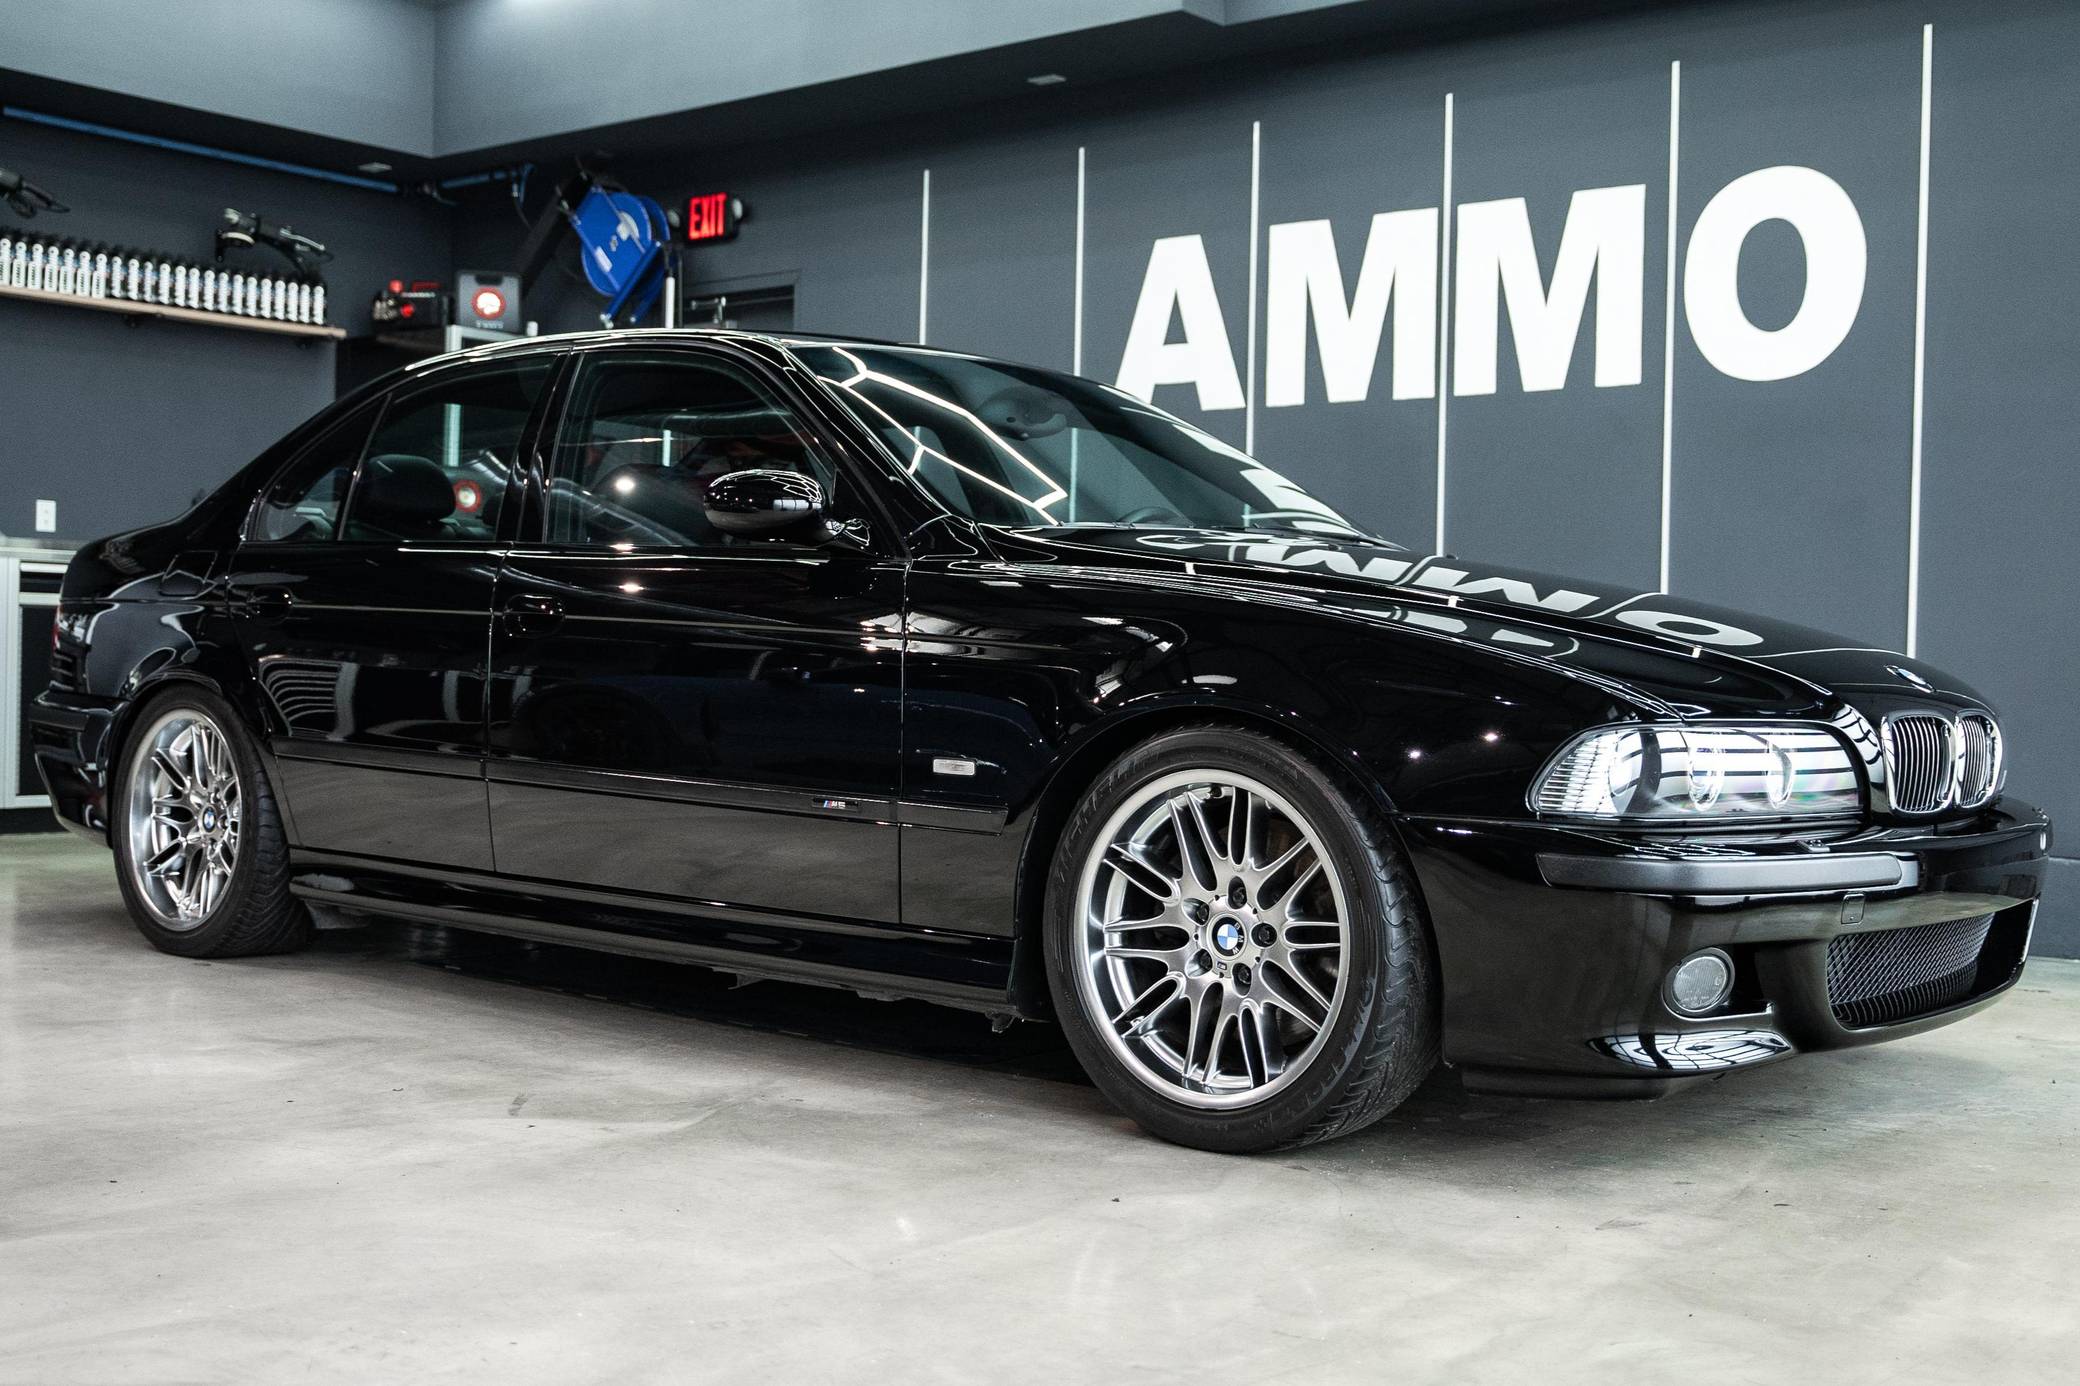 Video: Mile eaters - BMW 5 Series (E39) on BBS rims!